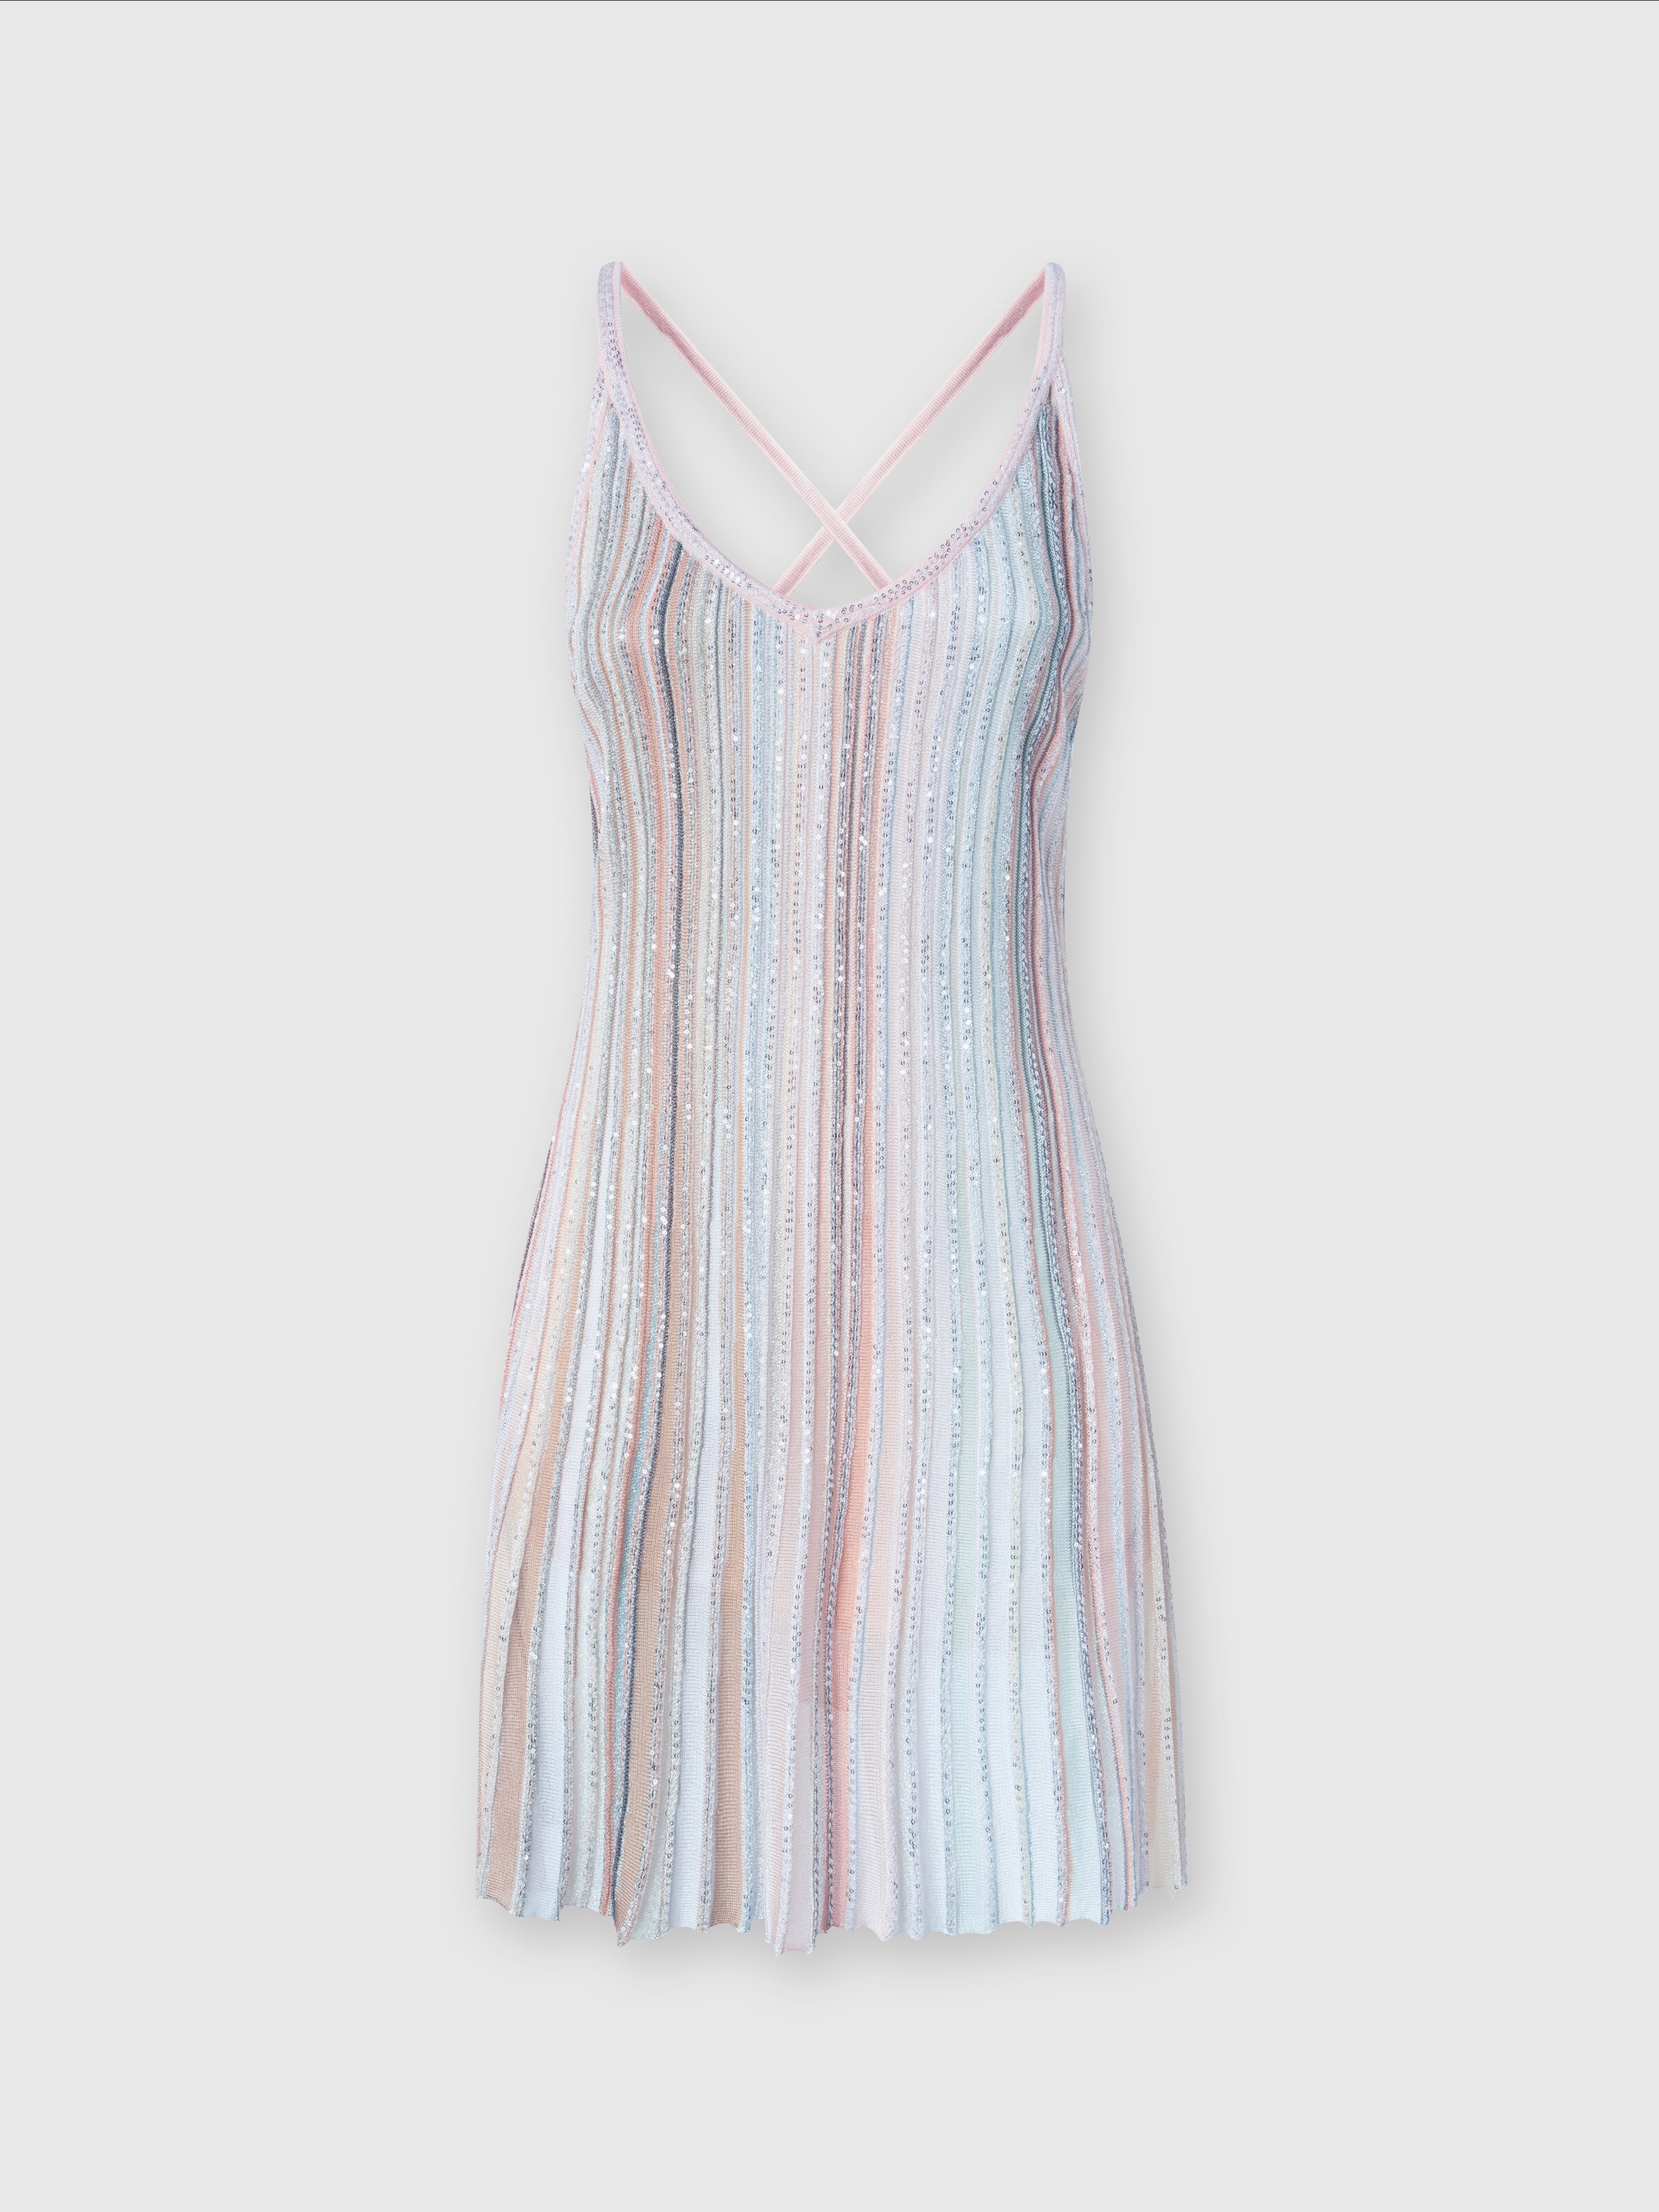 Minidress in vertical striped knit with sequins, Multicoloured  - 0